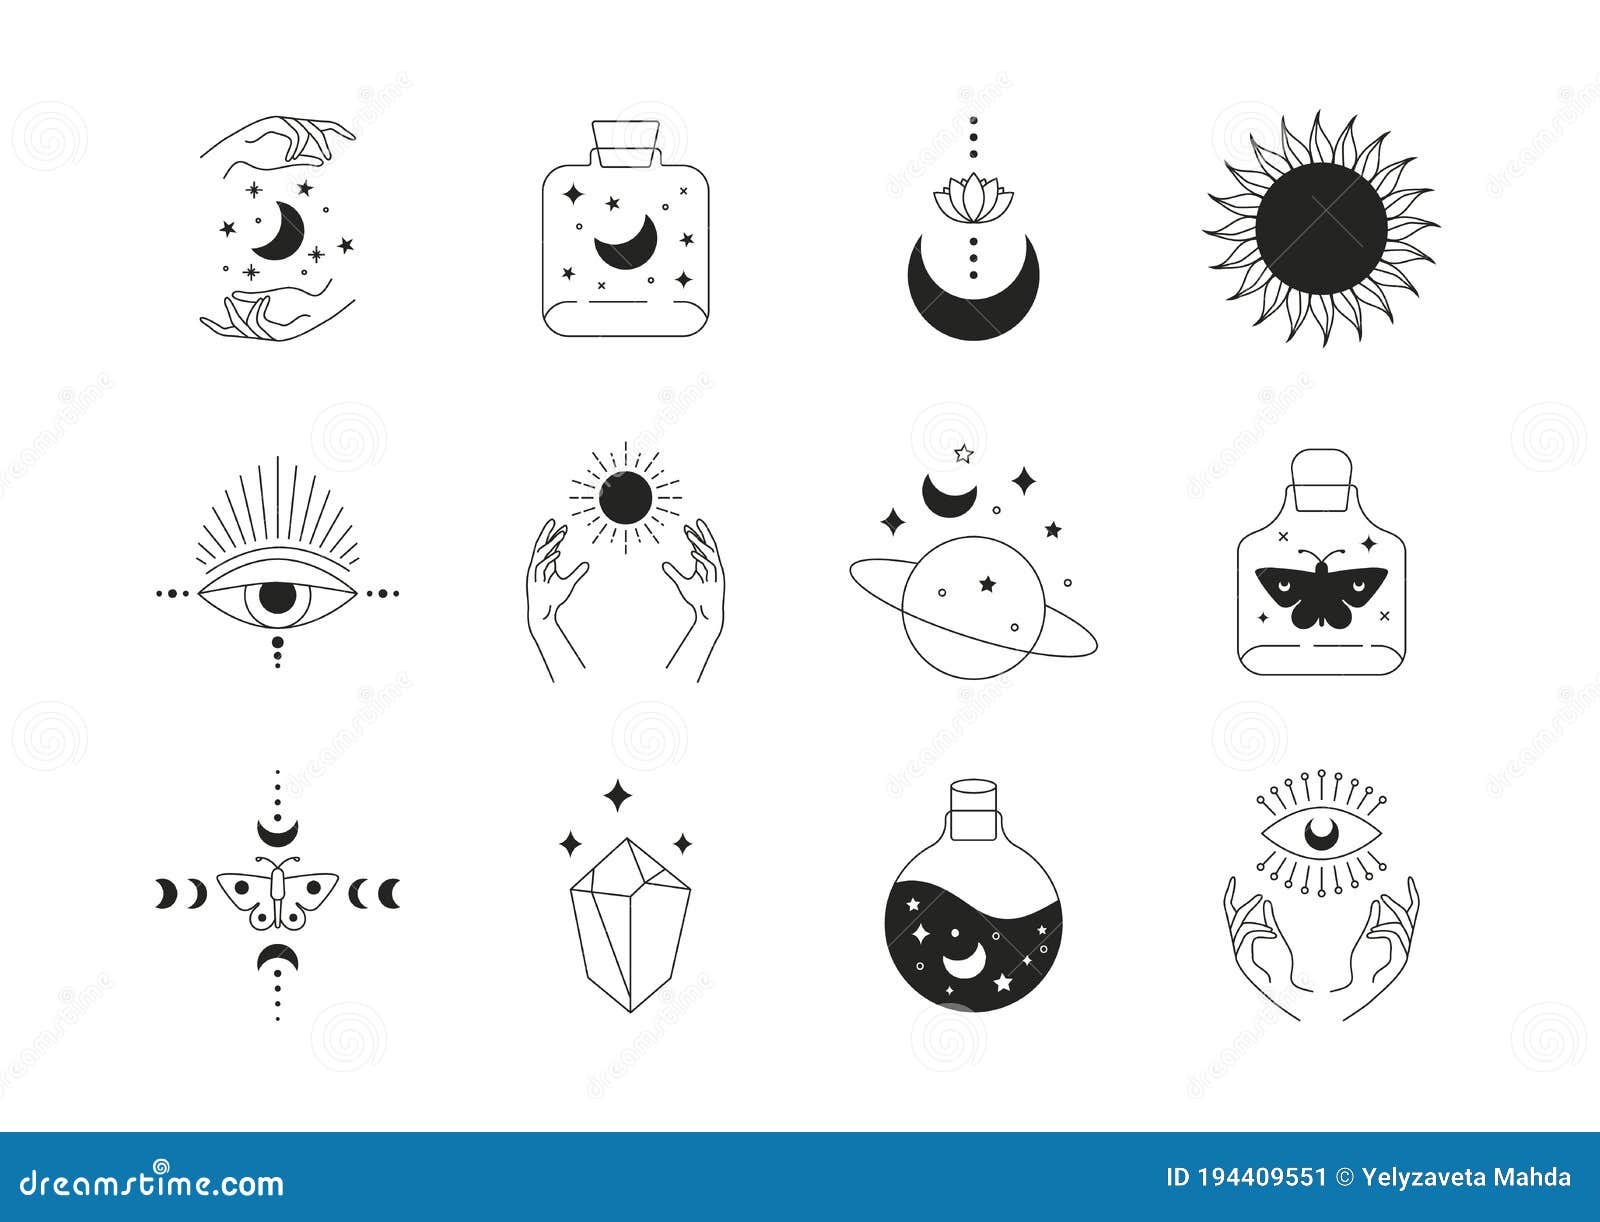 Boho Doodle Magic Set Mystic Simple Hand Drawn Logo Icons With Snake Crystal Eye Sun Lotus Moon Abstract Vector Illustration Stock Vector Illustration Of Line Linear